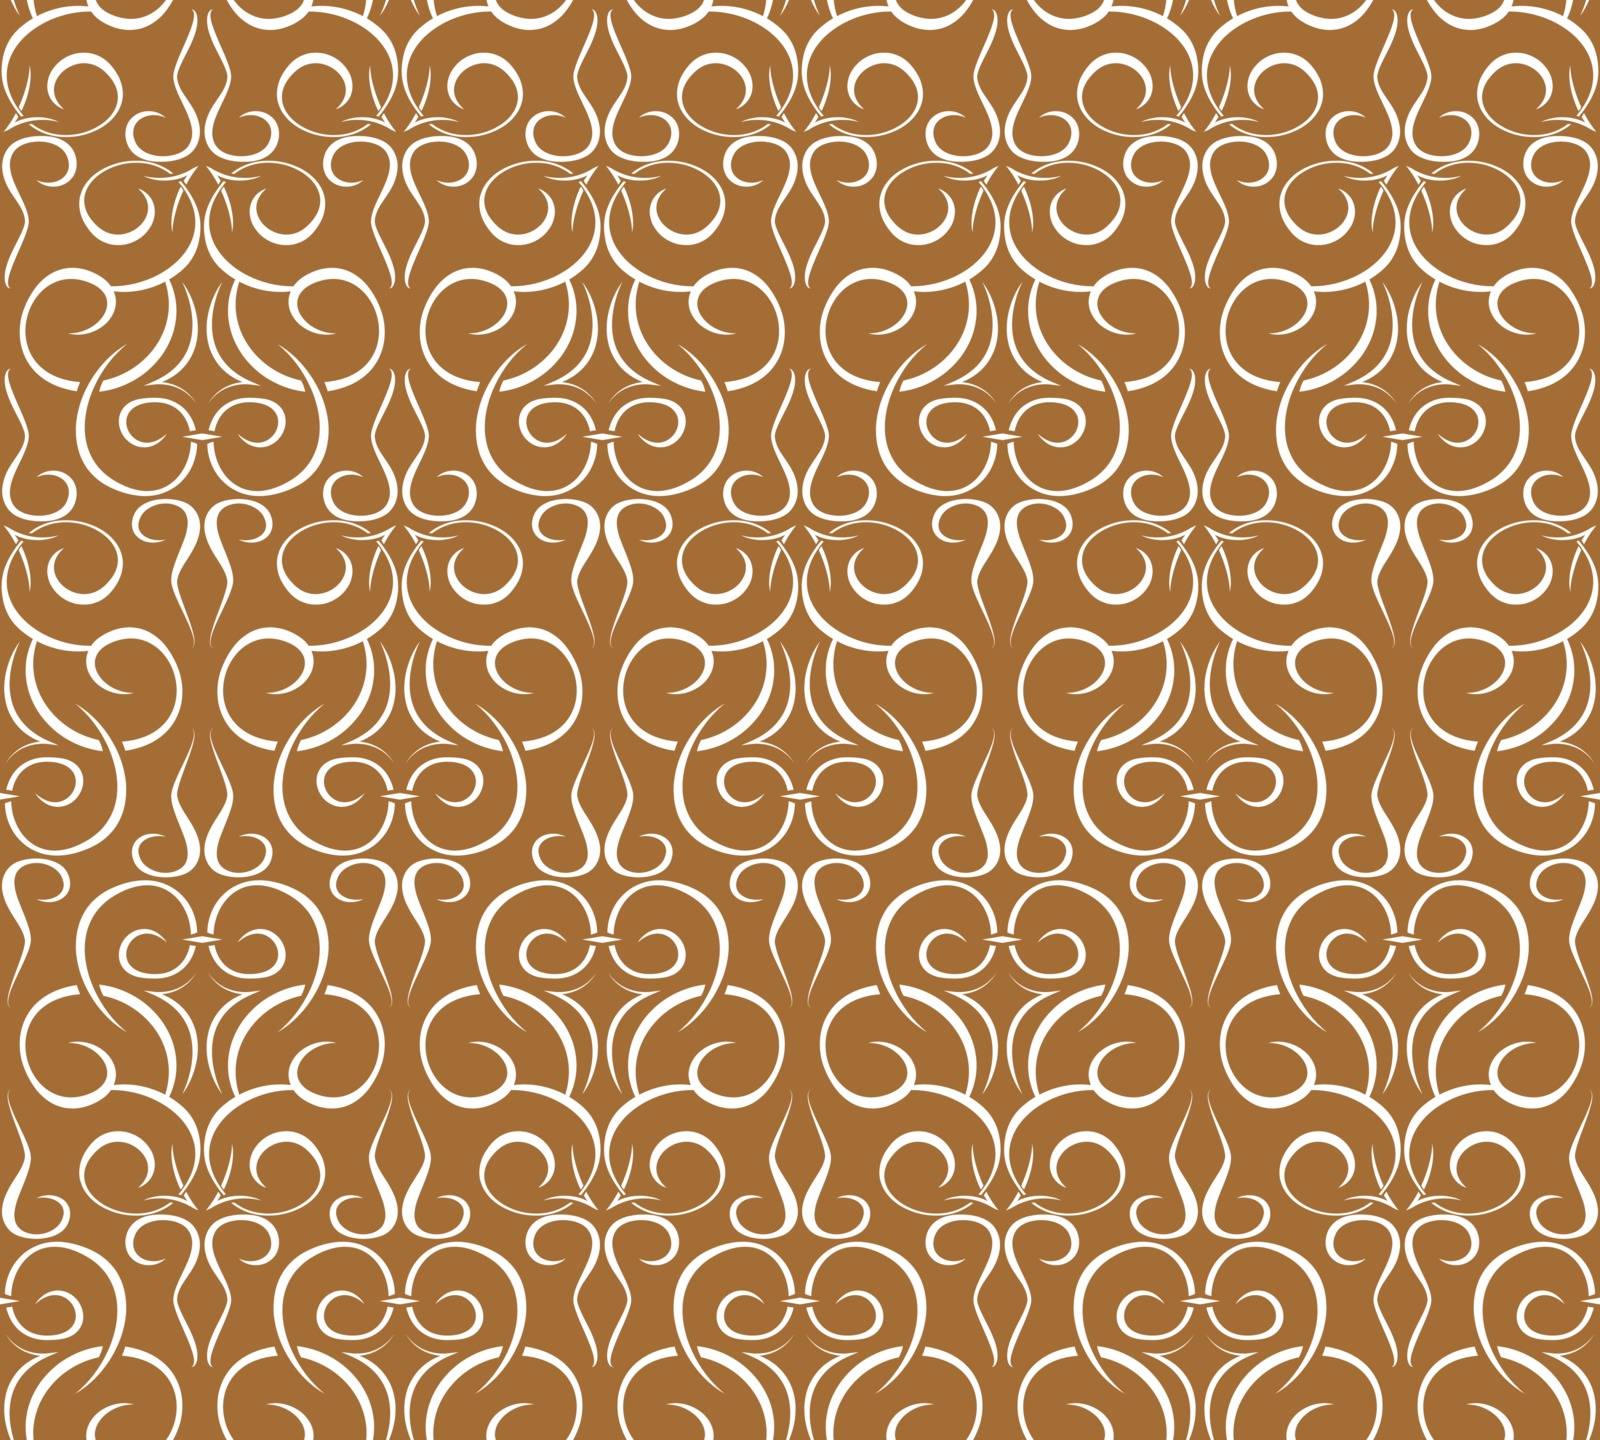 Repeating pattern on a brown. seamless wallpaper by pzRomashka